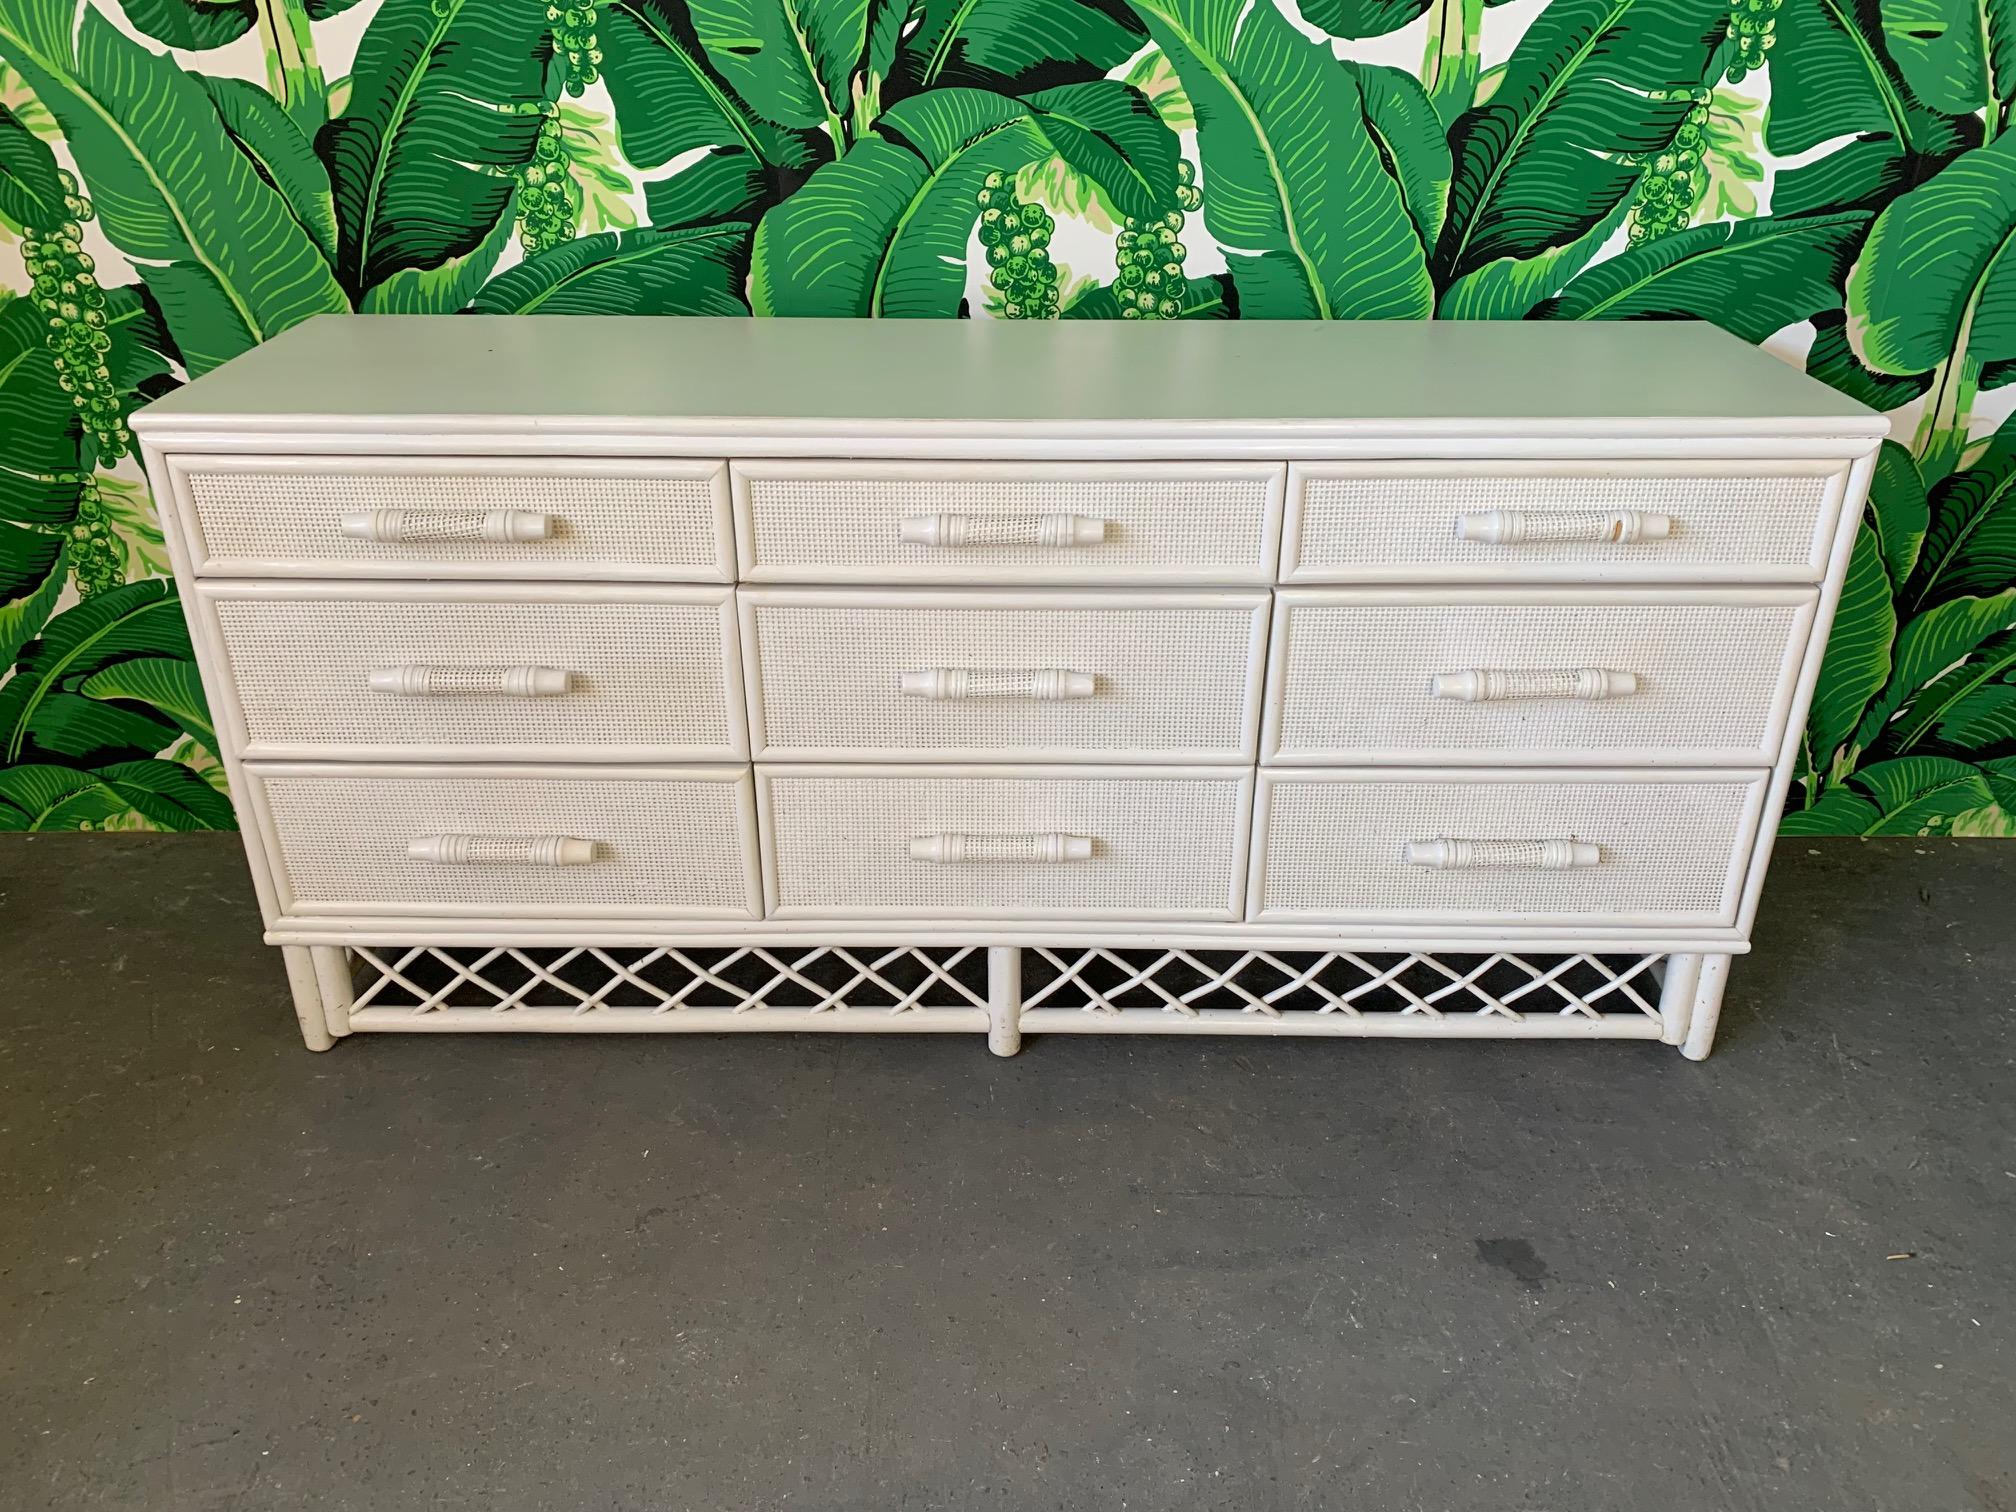 White rattan dresser features chinoiserie detailing and a rattan lattice design skirt. Good vintage condition with minor imperfections consistent with age.